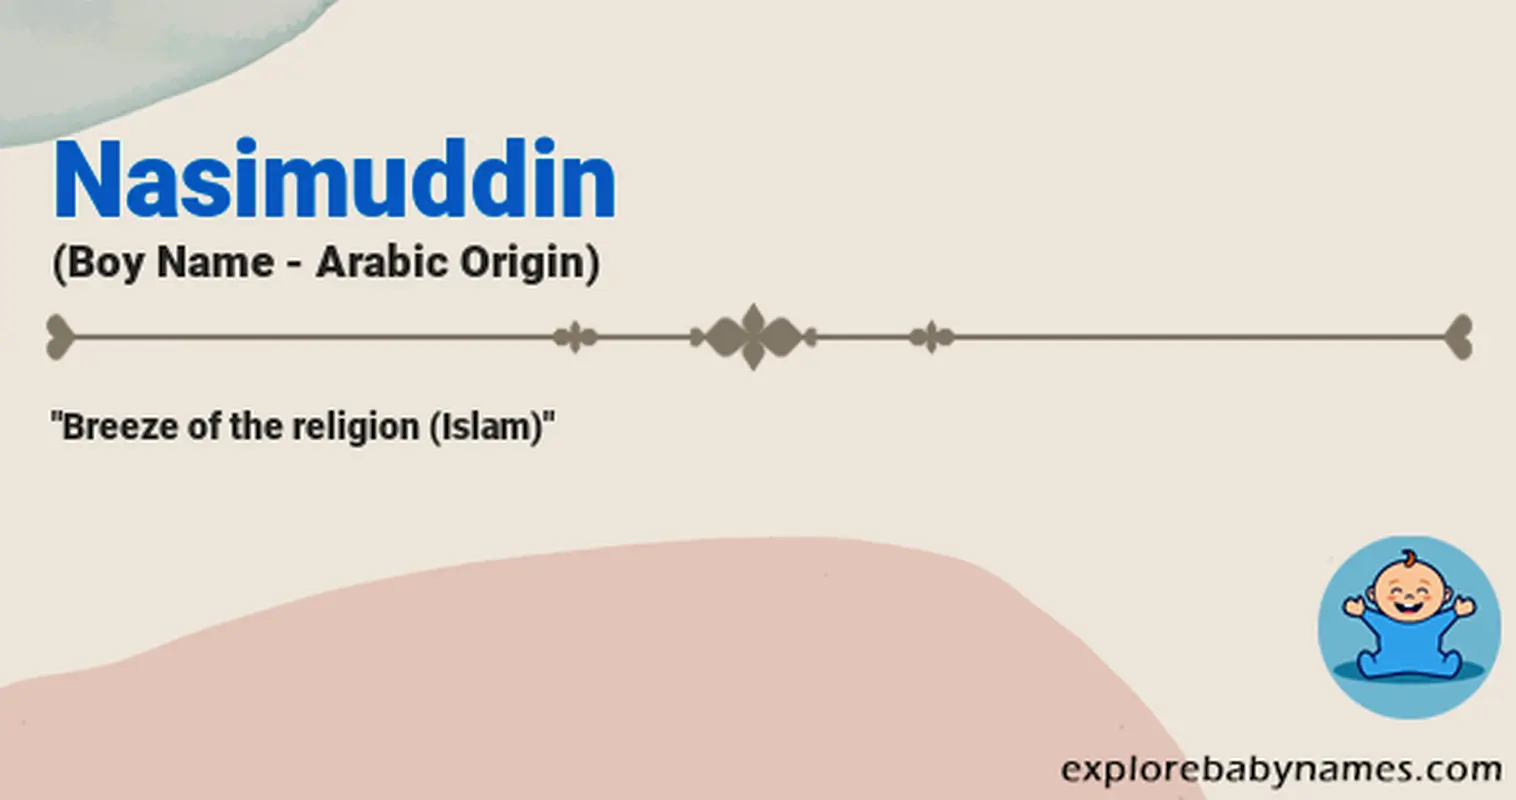 Meaning of Nasimuddin